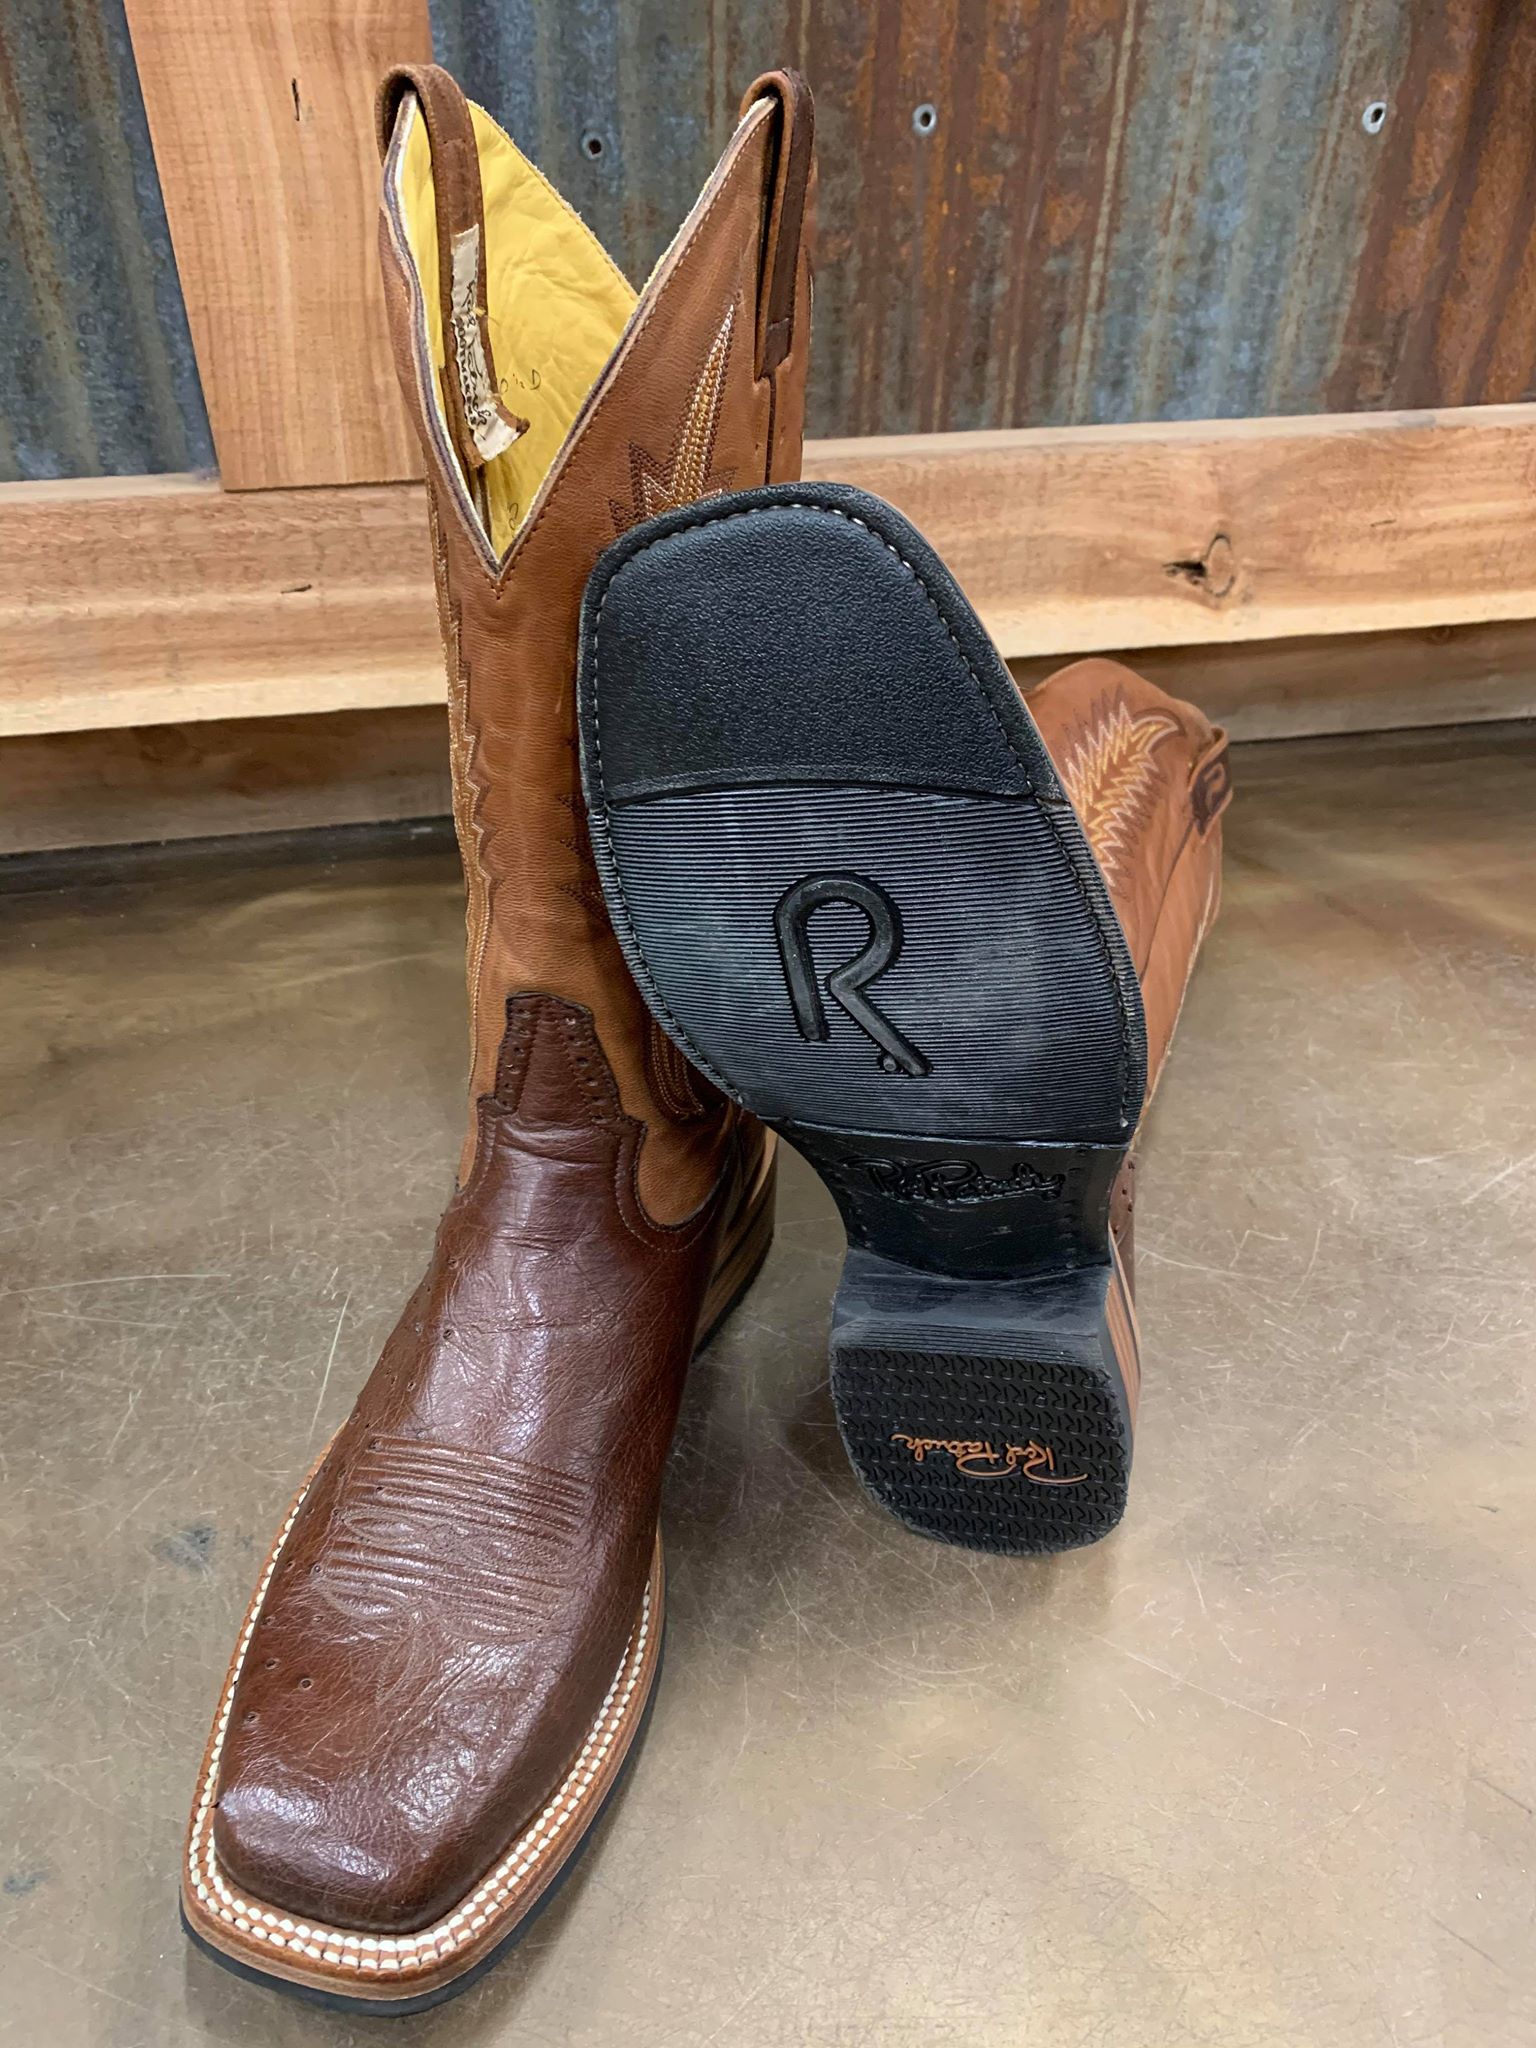 Rod Patrick Kango Tobacco Smooth Quill RPM129-ROD PATRICK BOOTS-Rod Patrick-Lucky J Boots & More, Women's, Men's, & Kids Western Store Located in Carthage, MO